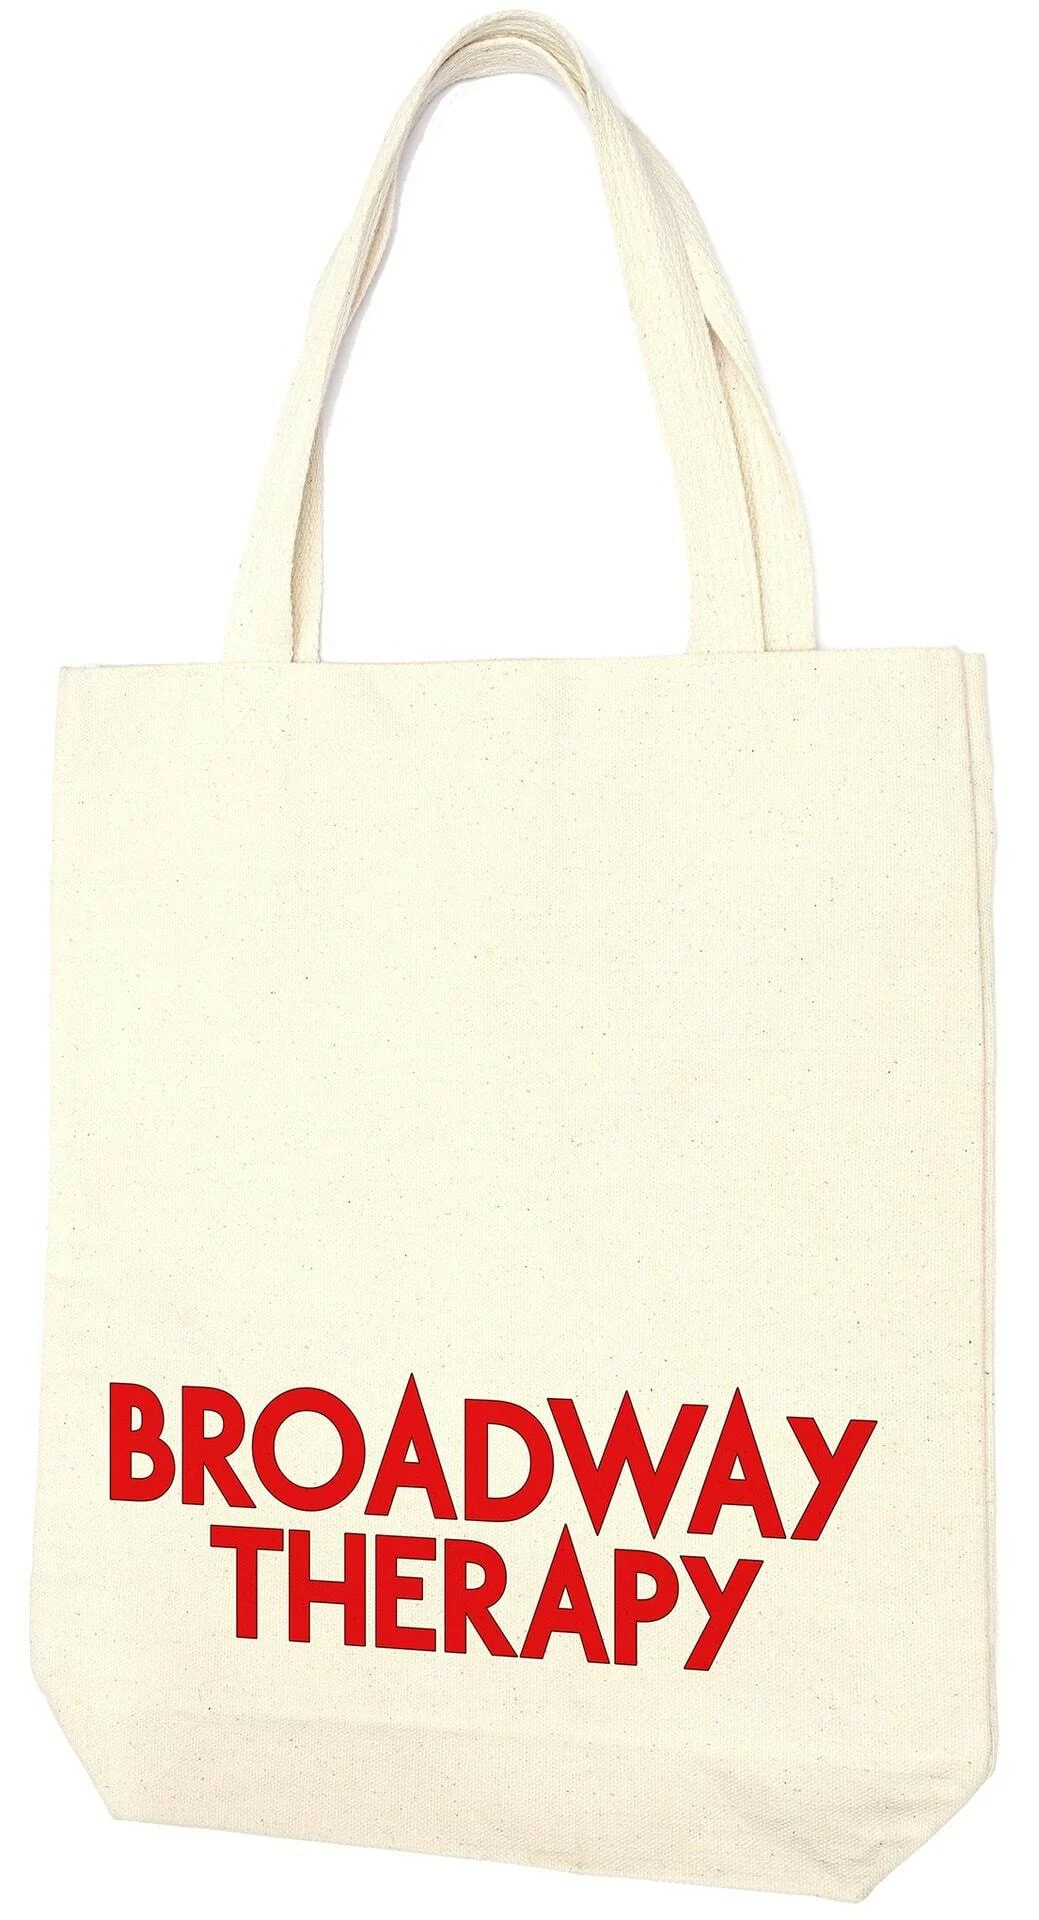 Miss Bobby_Sac_Broadway Therapy